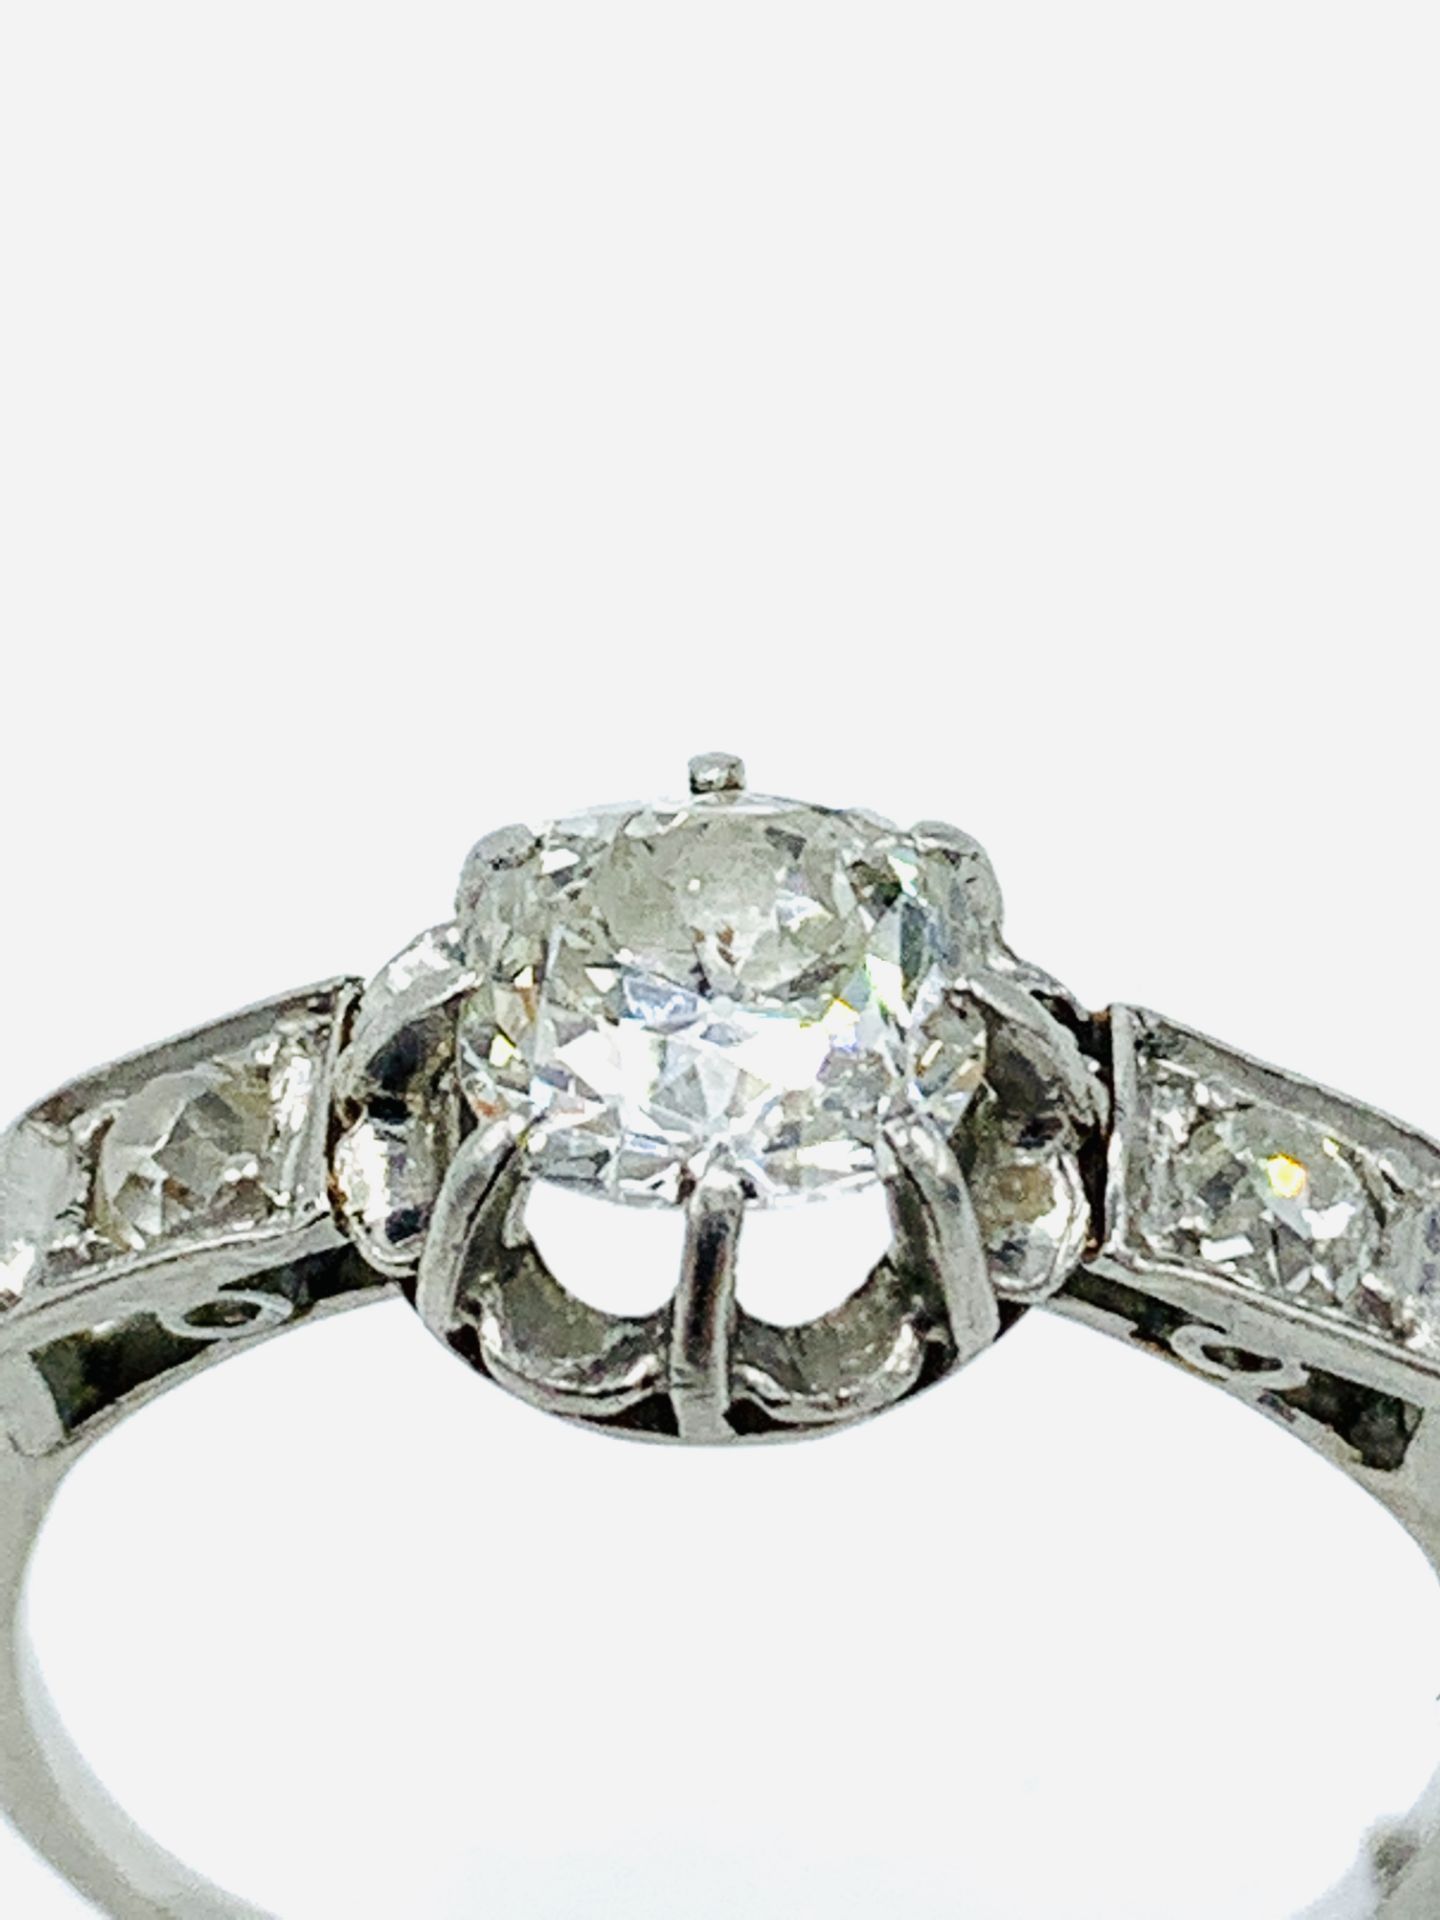 18ct white gold single stone diamond ring with diamond shoulders - Image 4 of 8